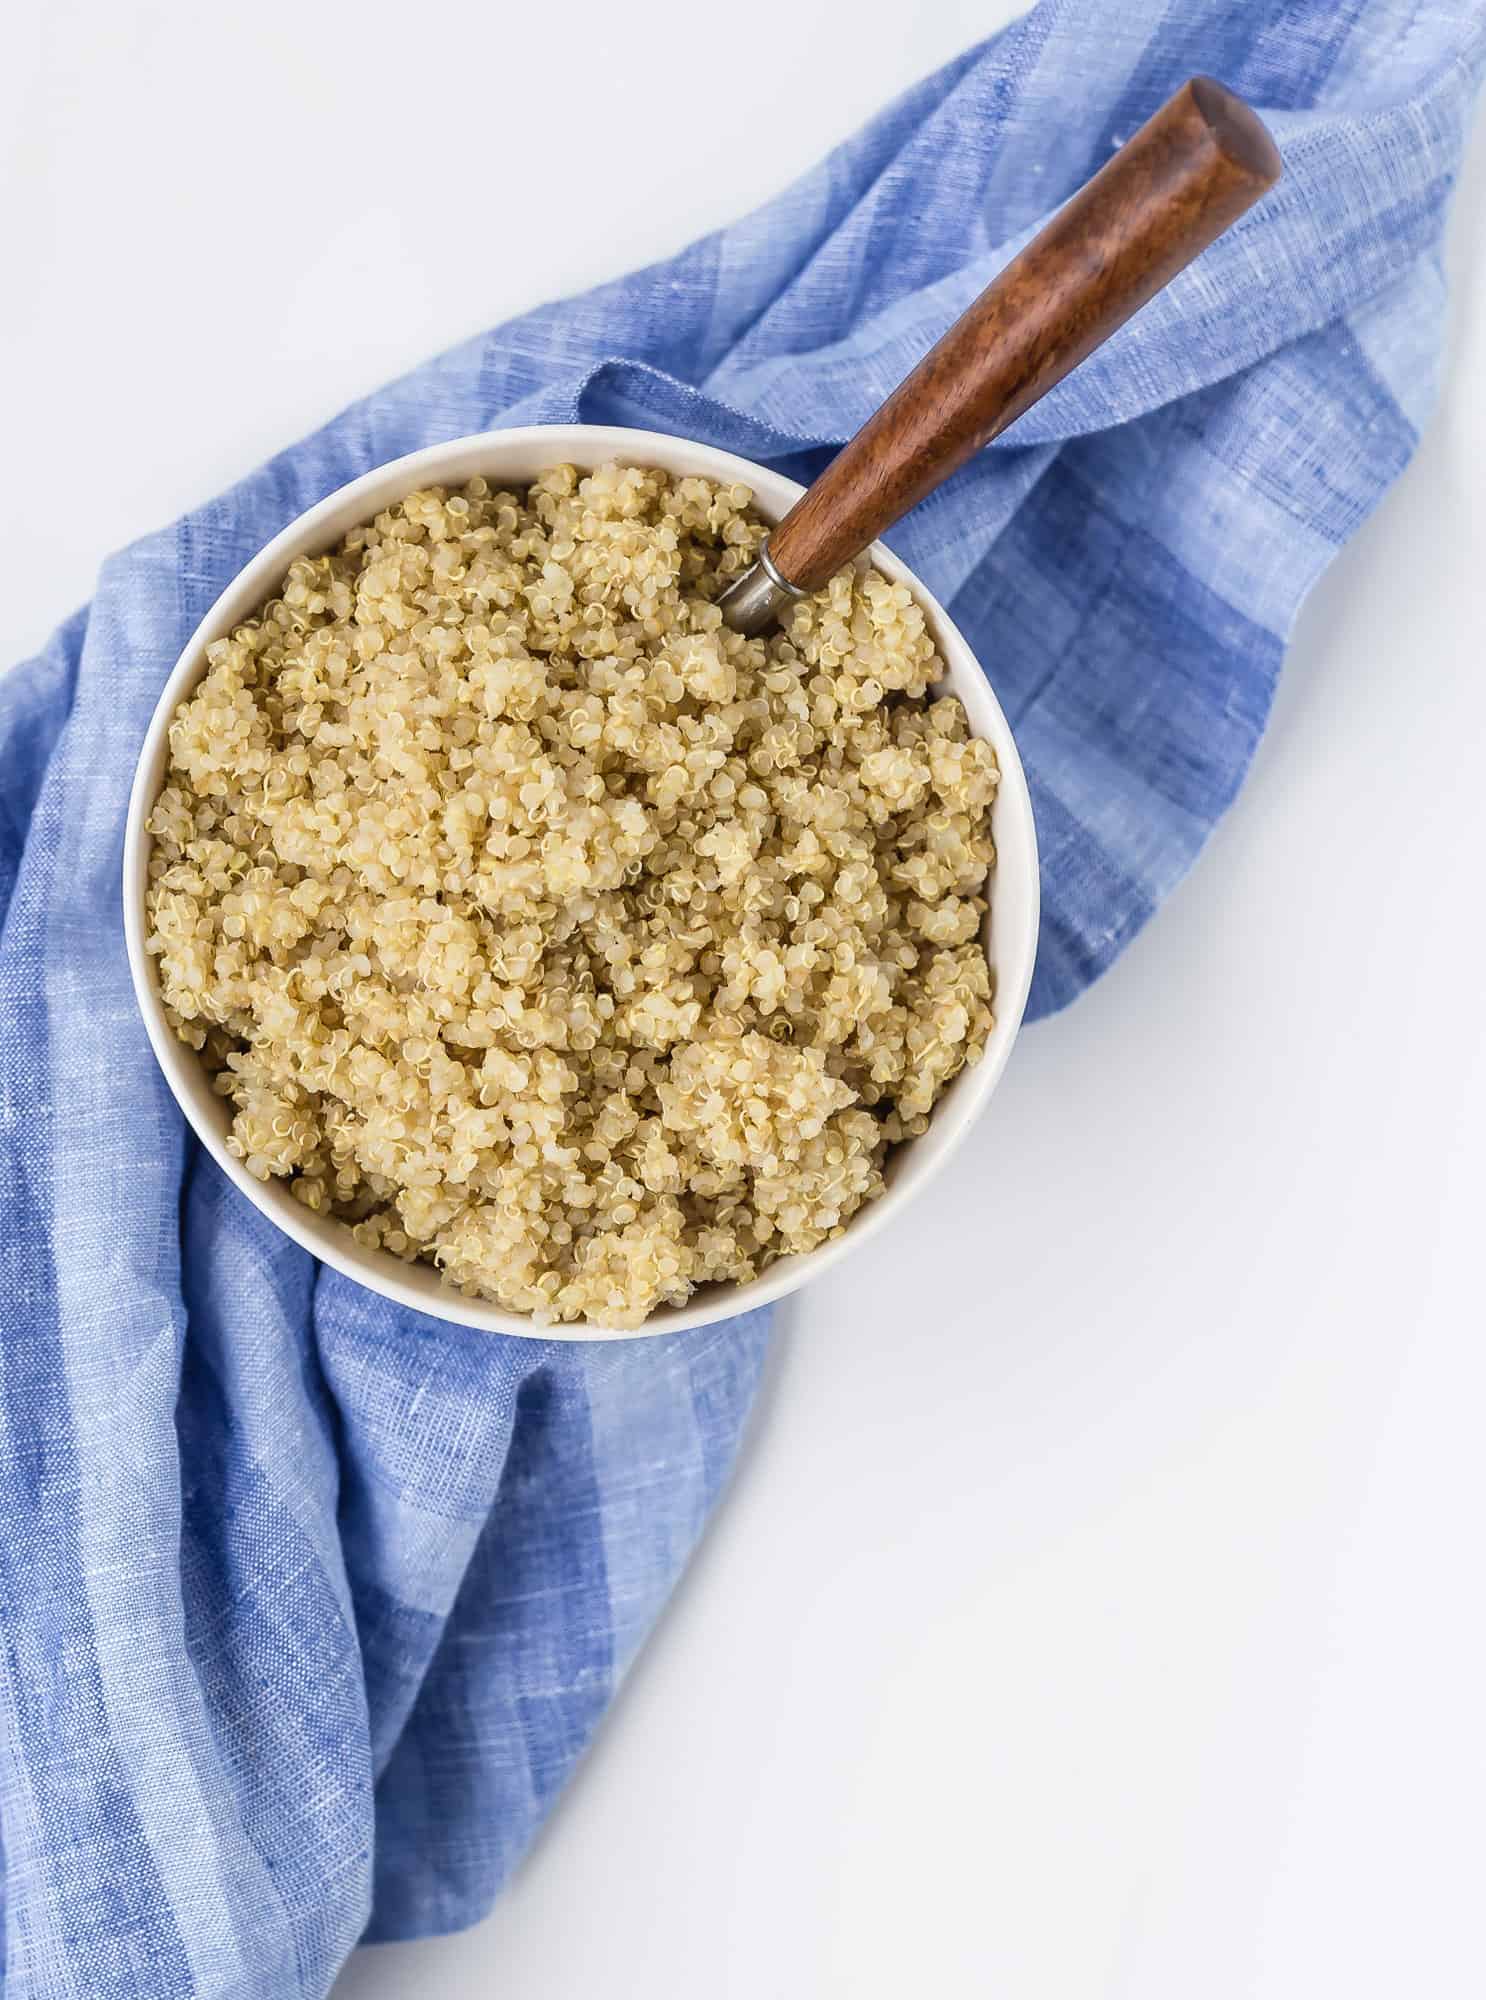 Cooked quinoa in a bowl.